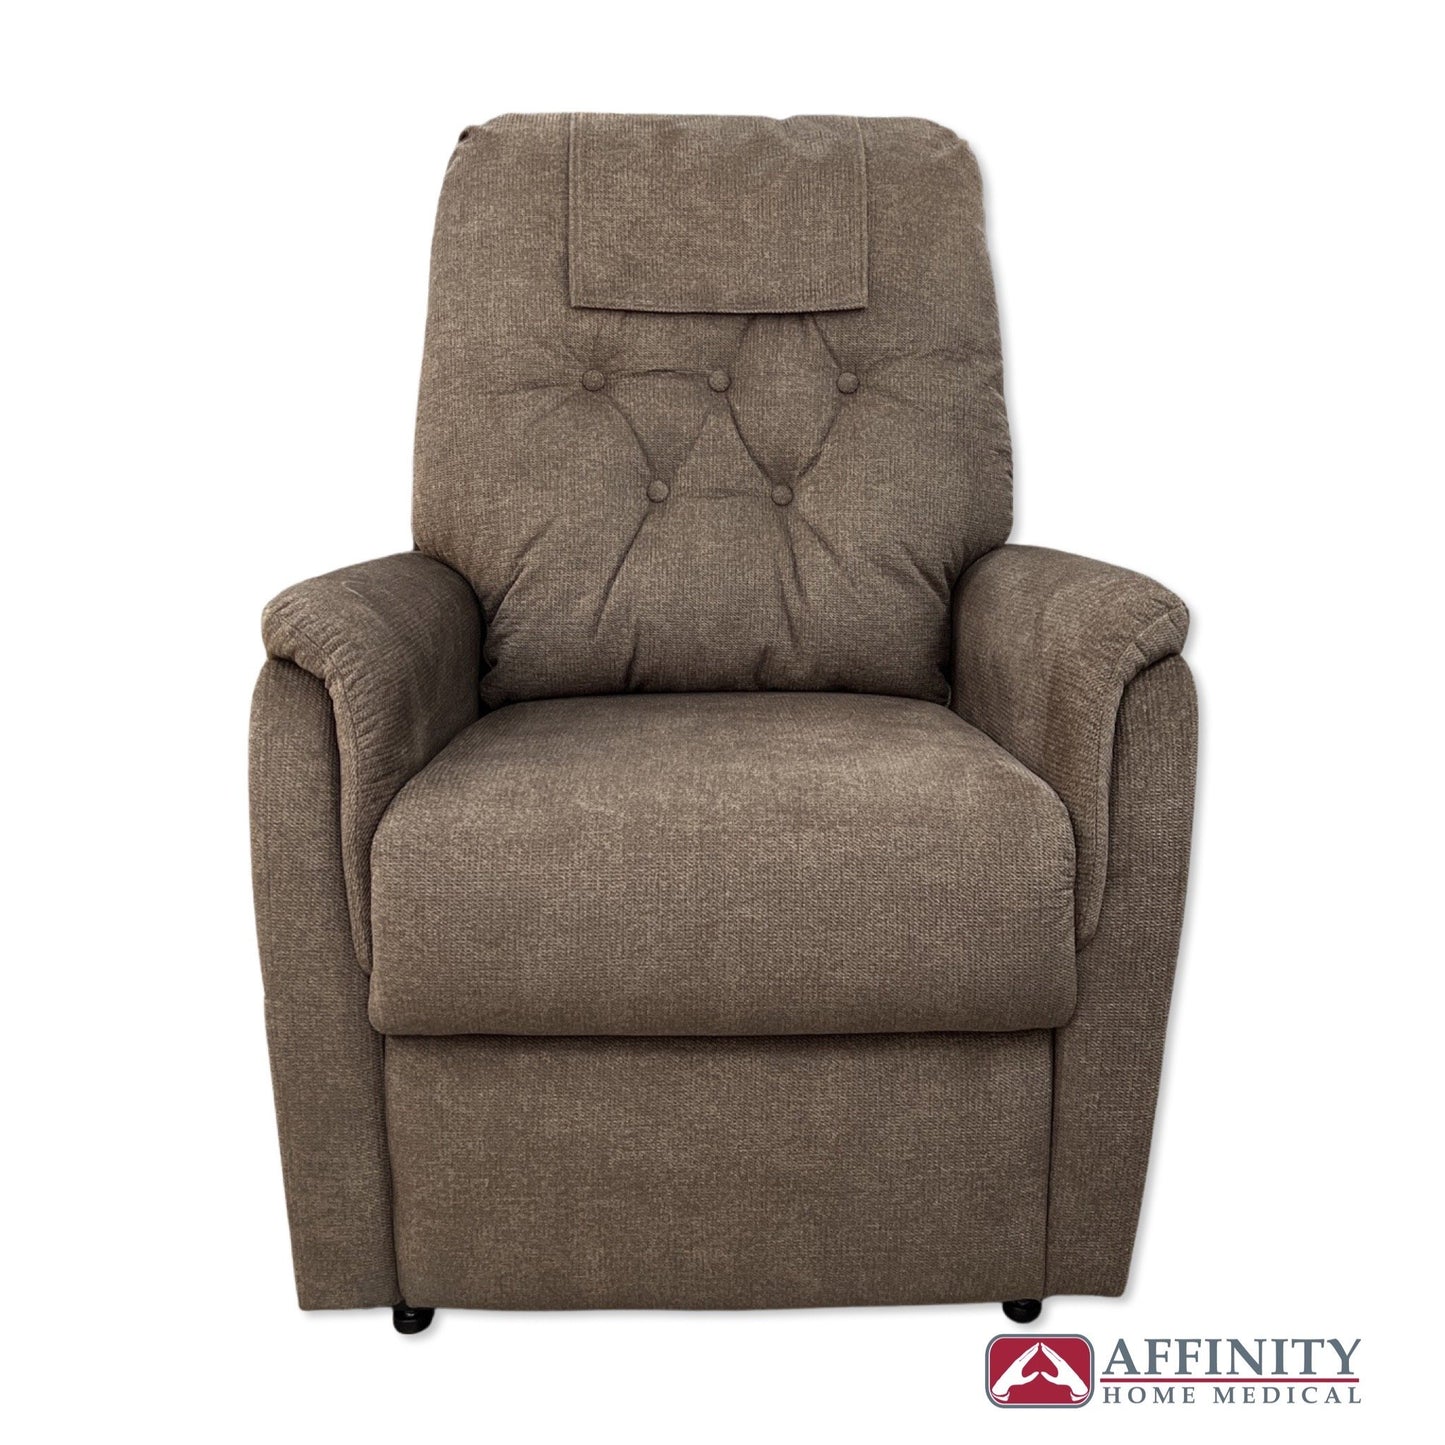 CAPRI 2 POSITION LIFT CHAIR - ELK FABRIC - IN STOCK IMMEDIATE DELIVERY